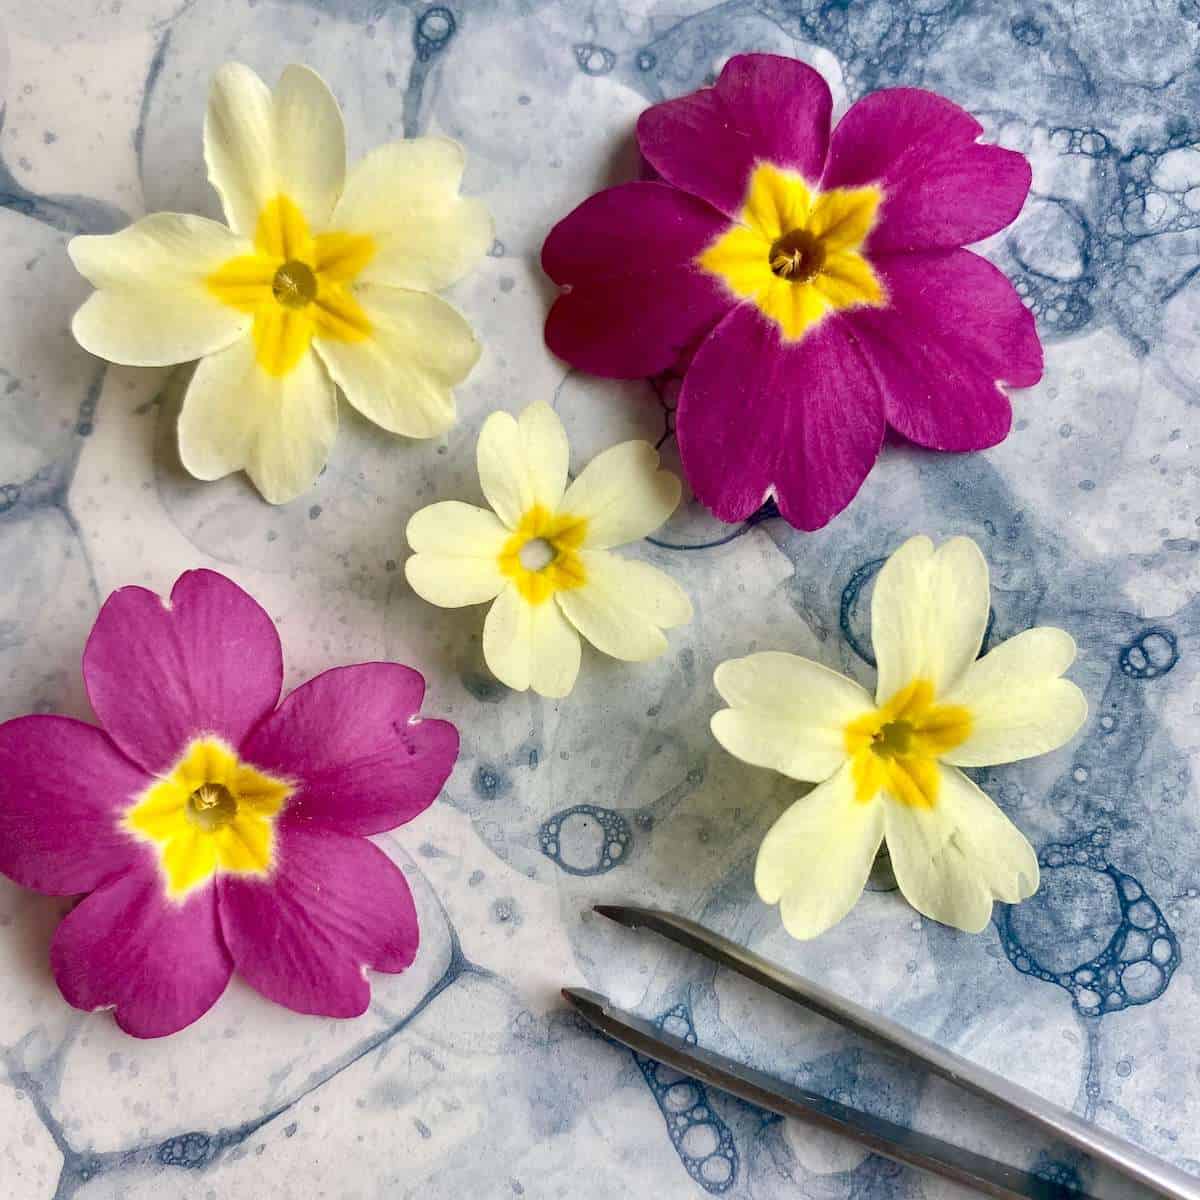 Five primrose flowers and a pair of tweezers on a serving plate